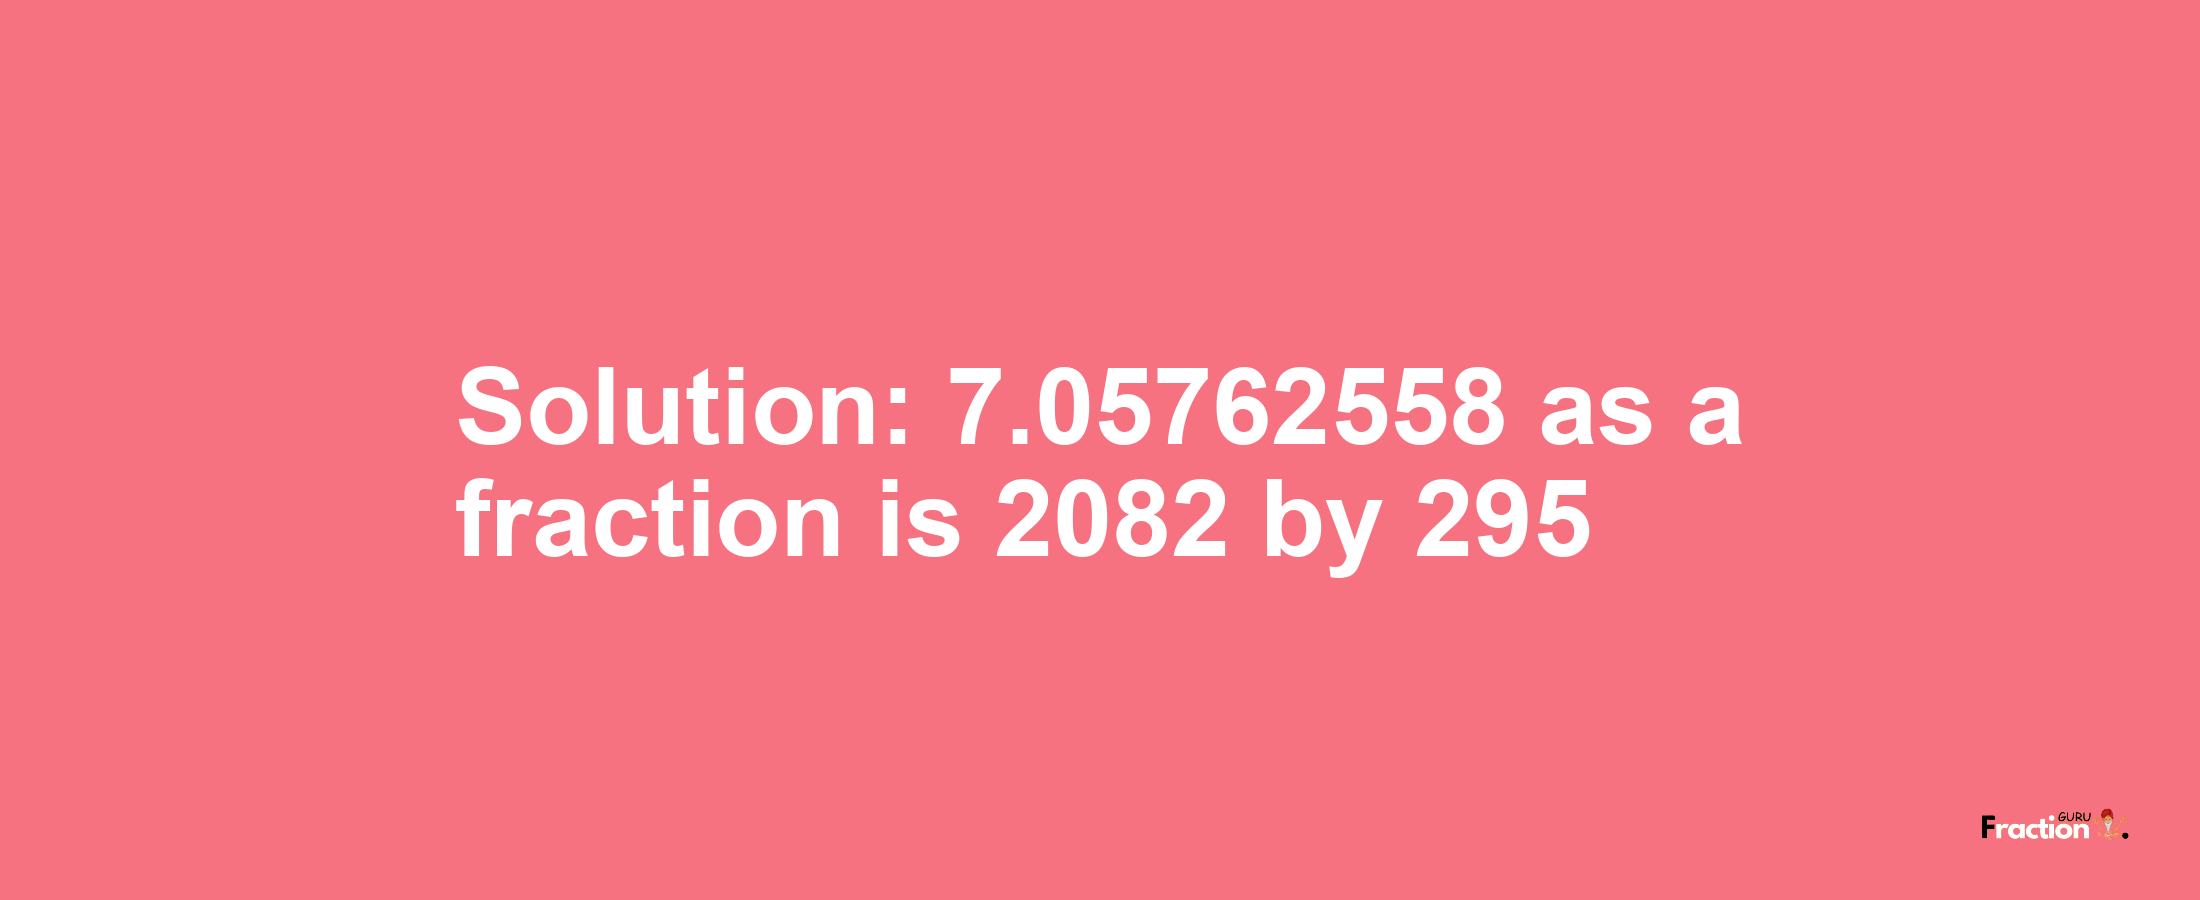 Solution:7.05762558 as a fraction is 2082/295